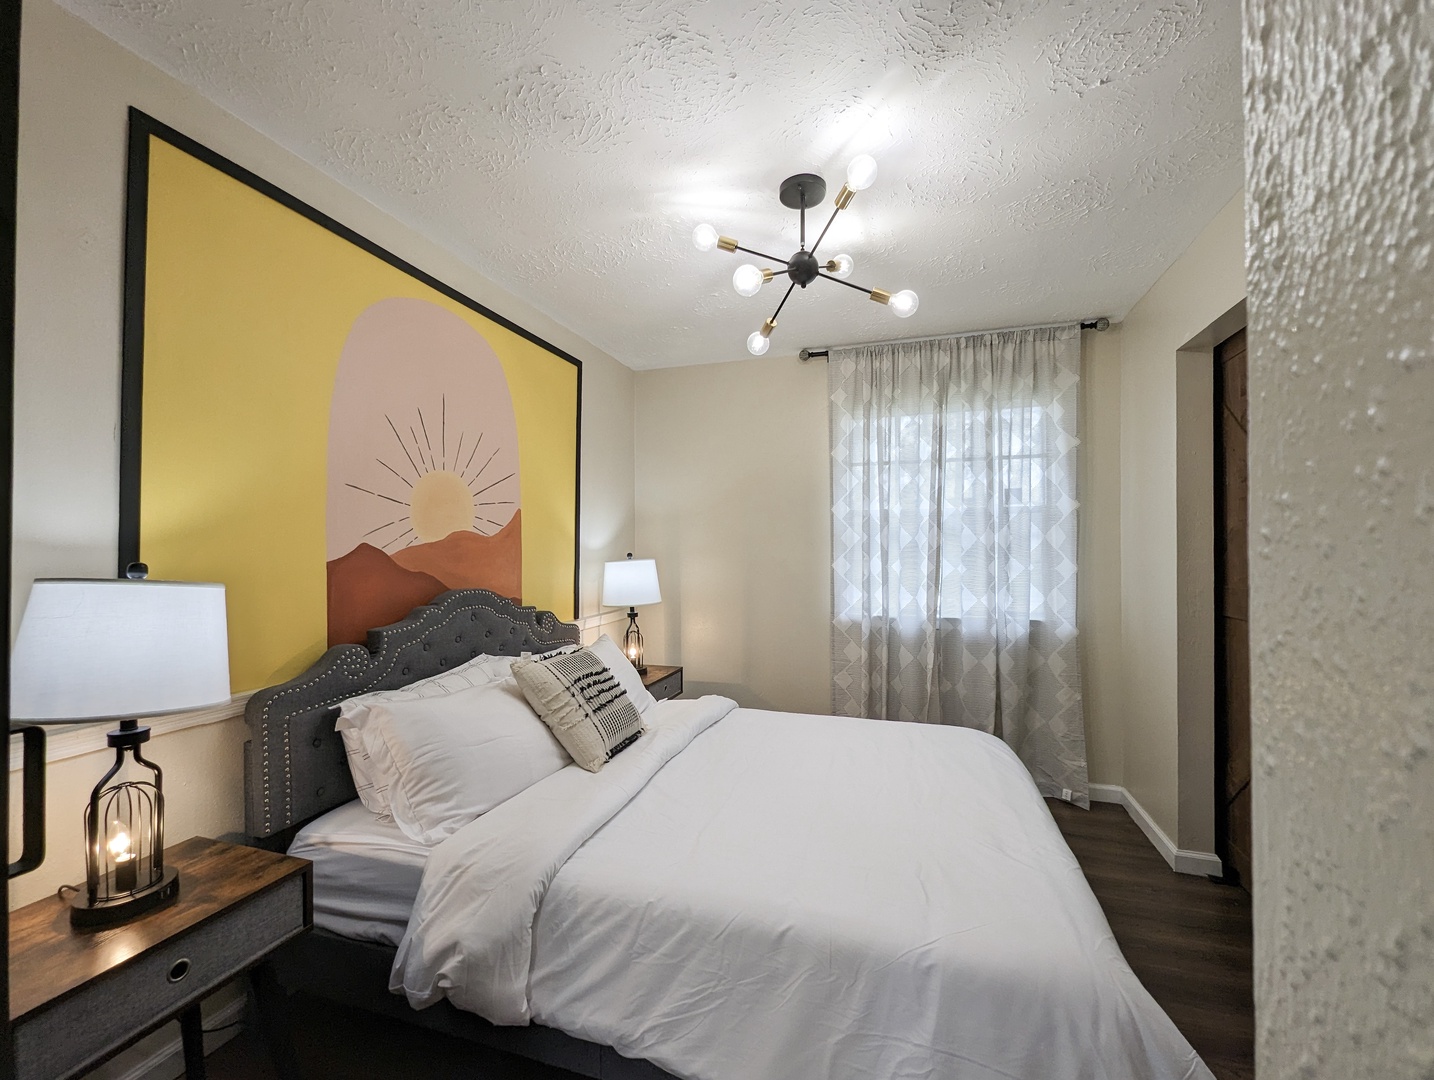 The fourth sunny bedroom includes a cozy queen-sized bed